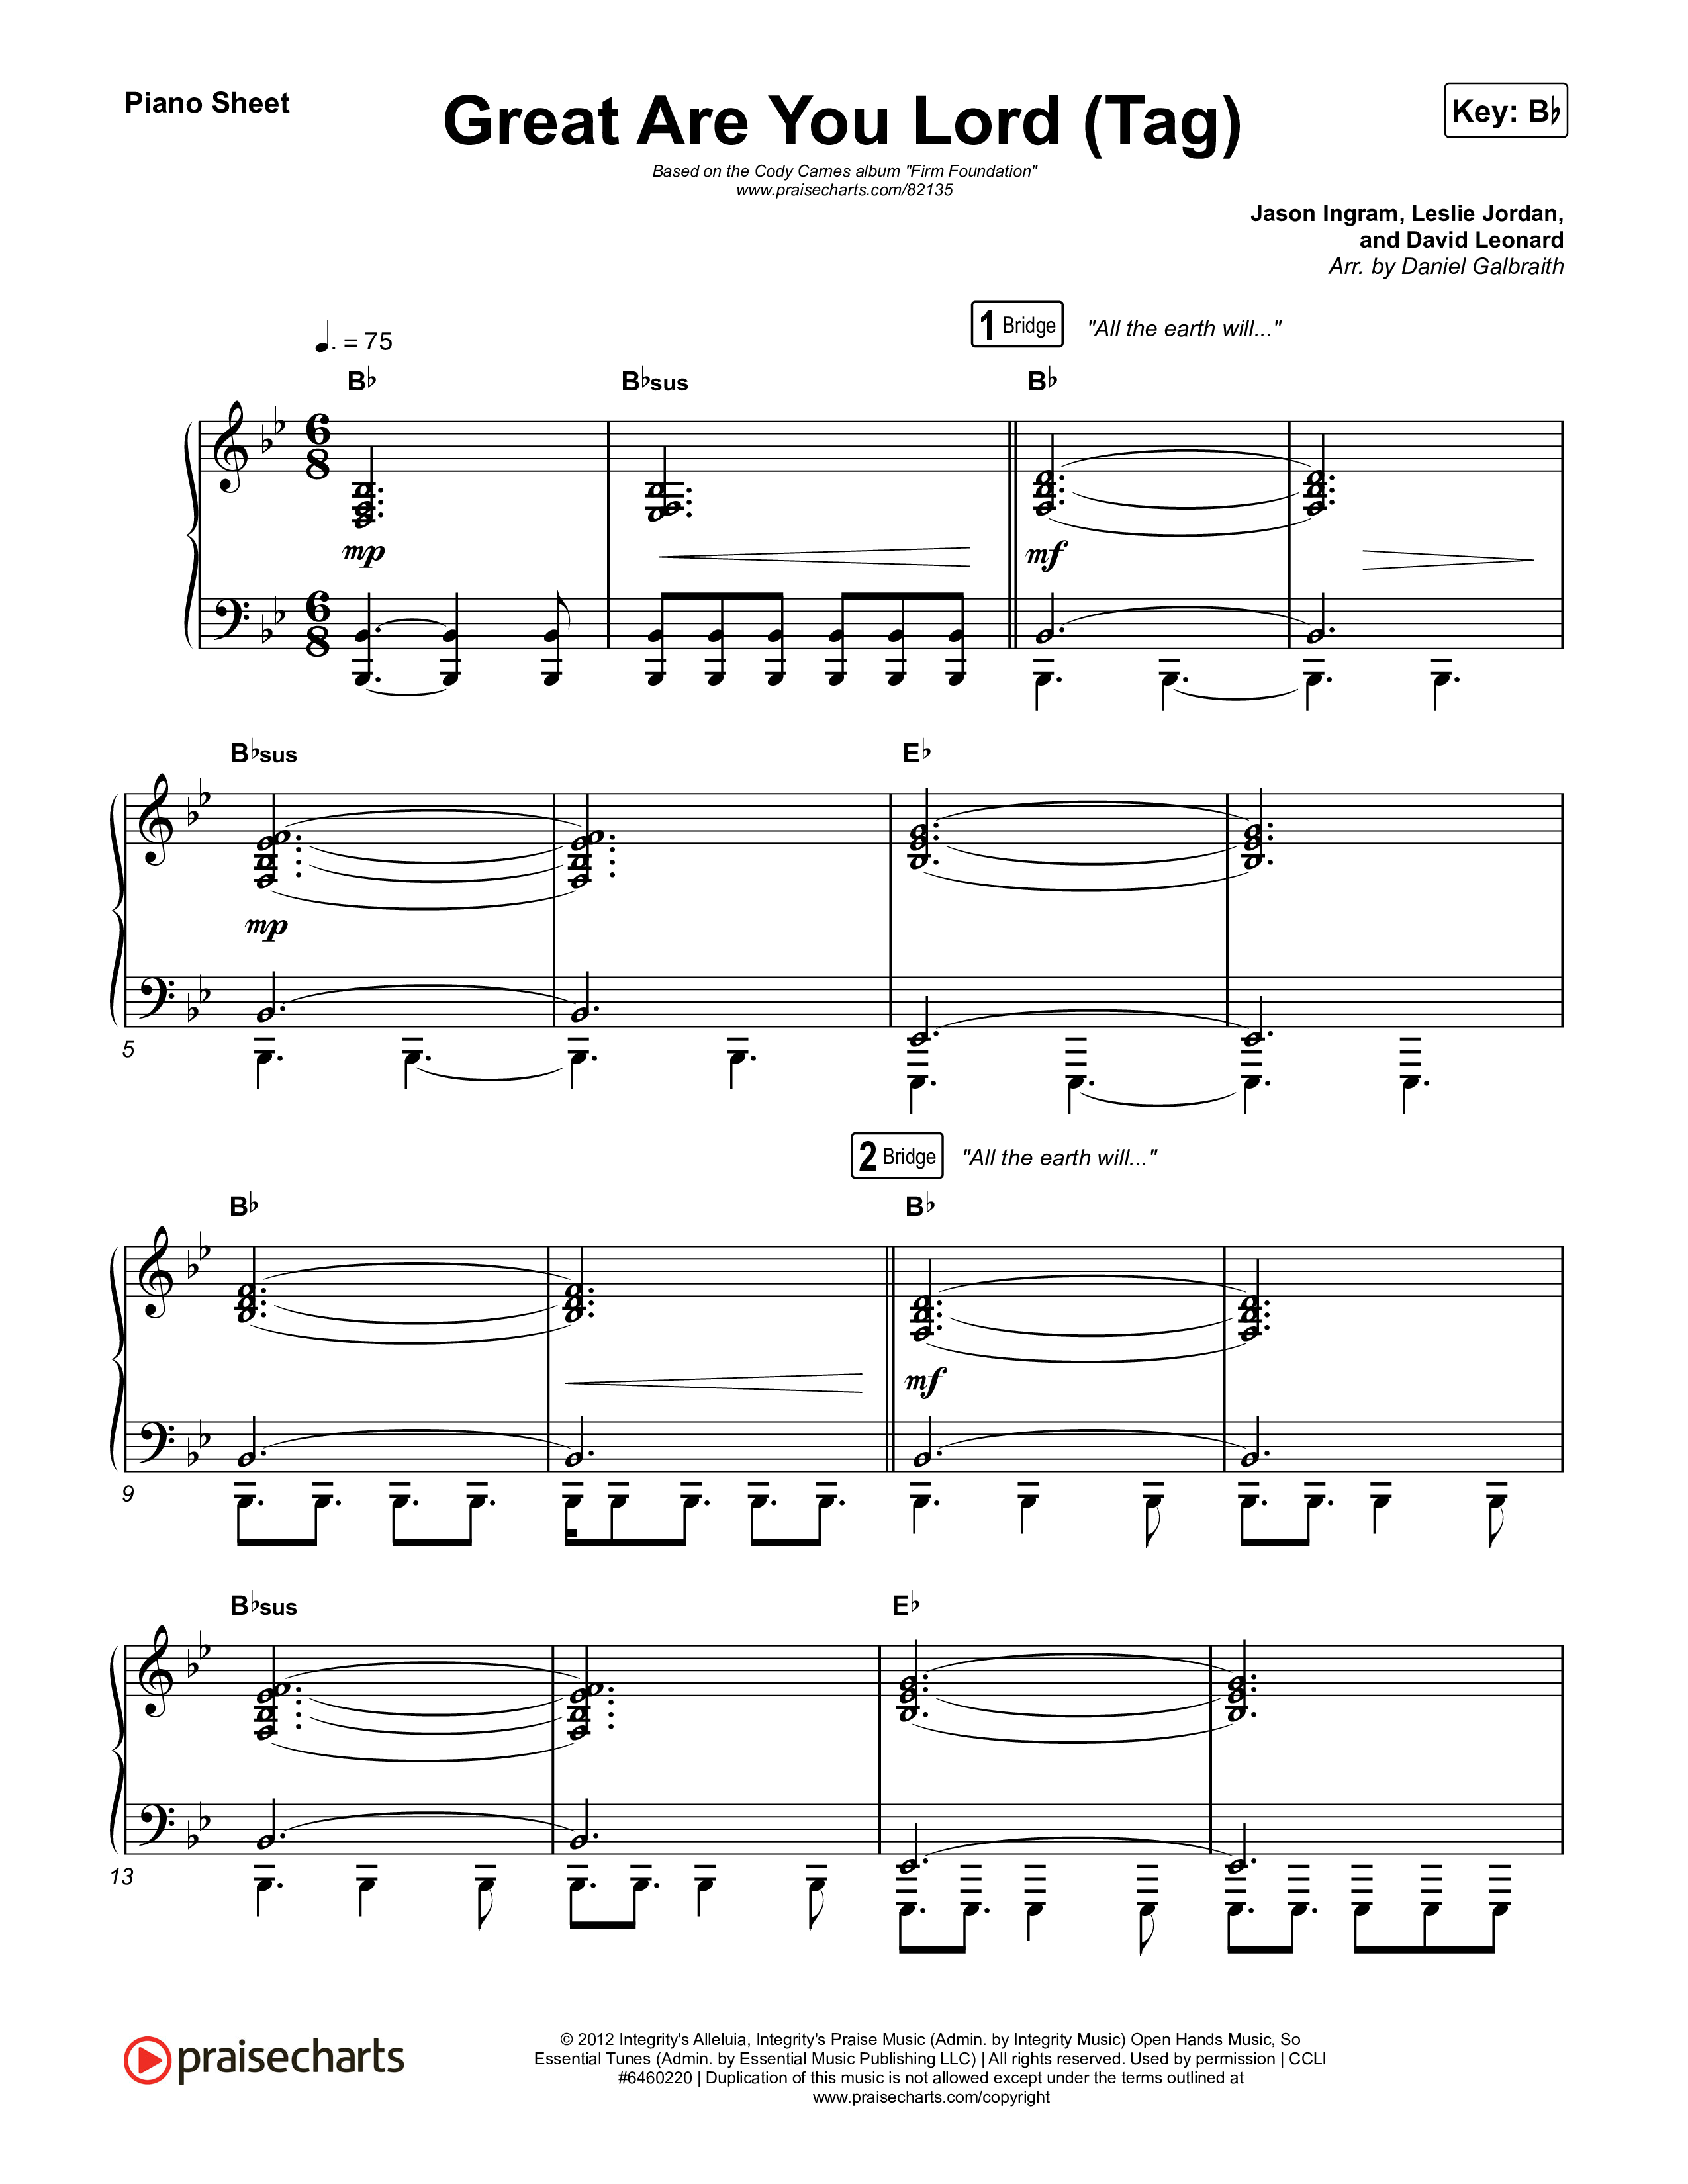 Great Are You Lord (Live) Piano Sheet (Cody Carnes)